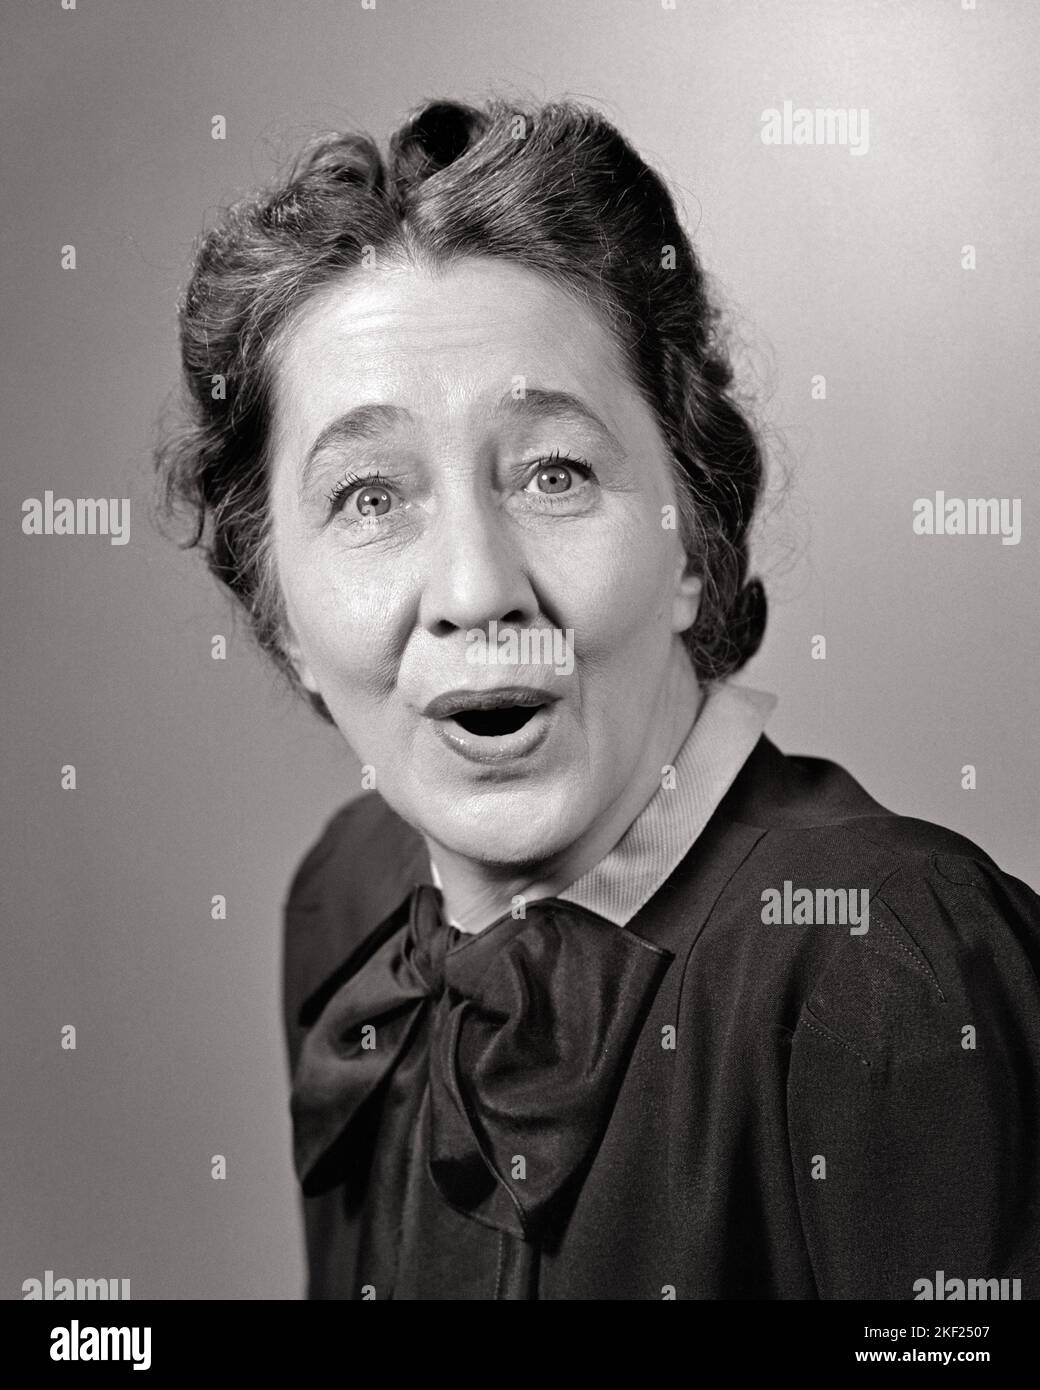 1940s PORTRAIT OF MIDDLE-AGED WOMAN SURPRISED FACIAL EXPRESSION LOOKING AT CAMERA - g262 HAR001 HARS EXPRESSIONS MIDDLE-AGED B&W EYE CONTACT SUCCESS BUG-EYED DREAMS HAPPINESS MIDDLE-AGED WOMAN HEAD AND SHOULDERS CHEERFUL DISCOVERY VICTORY EXCITEMENT OPPORTUNITY DELIGHTED FEELING SMILES CONNECTION ECSTATIC ELATED JOYFUL JUBILANT OVERJOYED THRILLED EYE-OPENER WIDE-EYED ASTONISHED EMOTION EMOTIONAL EMOTIONS AGAPE BLACK AND WHITE CAUCASIAN ETHNICITY HAR001 MOUTH OPEN OLD FASHIONED Stock Photo